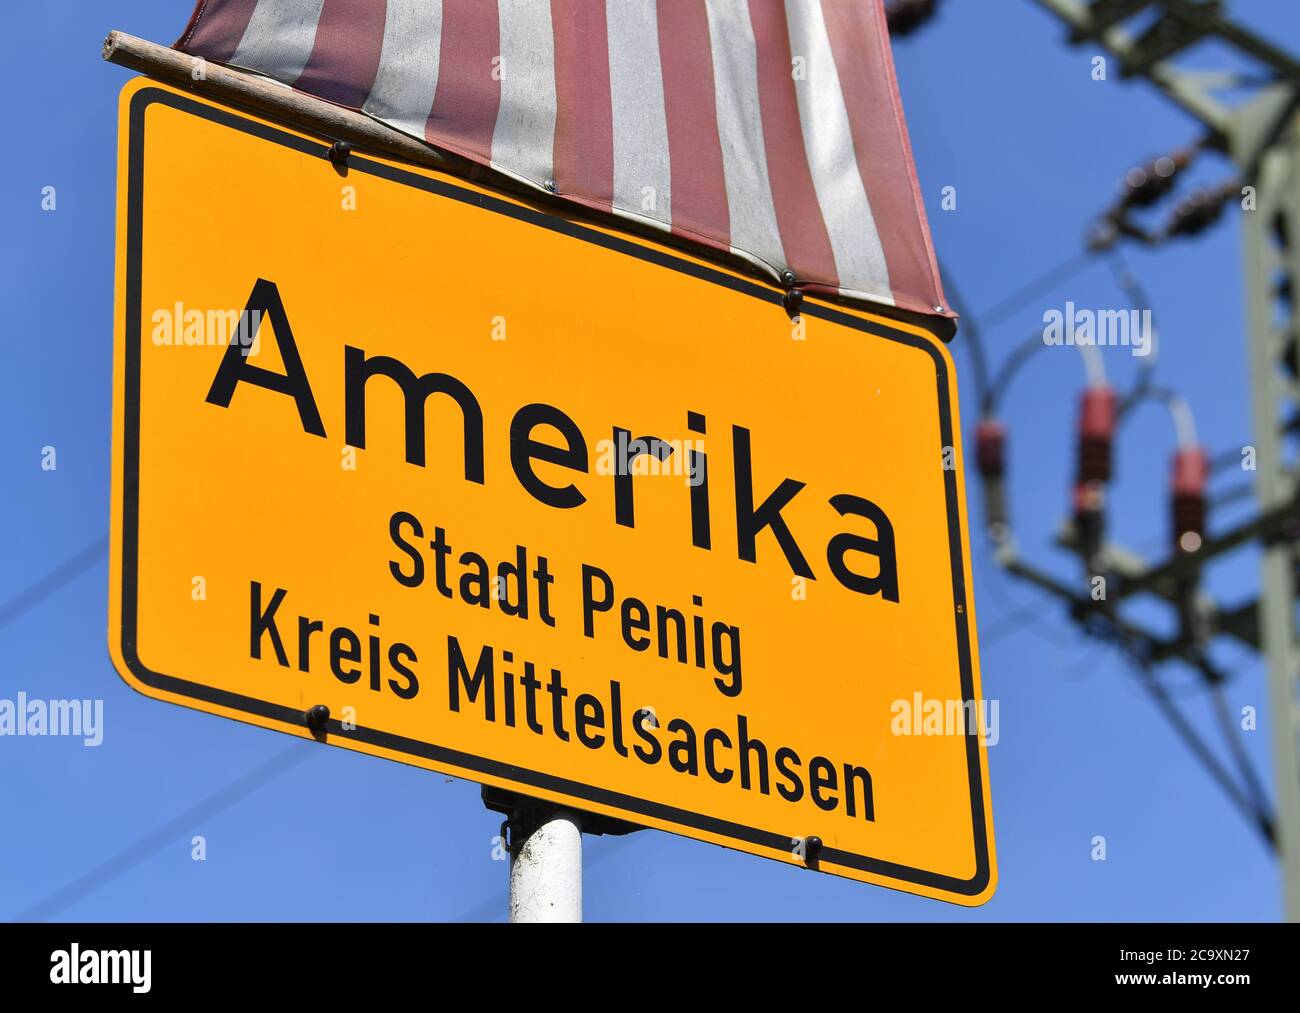 Amerika, Germany. 01st Aug, 2020. A place-name sign of America hangs under a flag of the USA in the village in the Mulde Valley. It is not known exactly how the present part of the town of Penig got its name. Credit: Hendrik Schmidt/dpa-Zentralbild/ZB/dpa/Alamy Live News Stock Photo